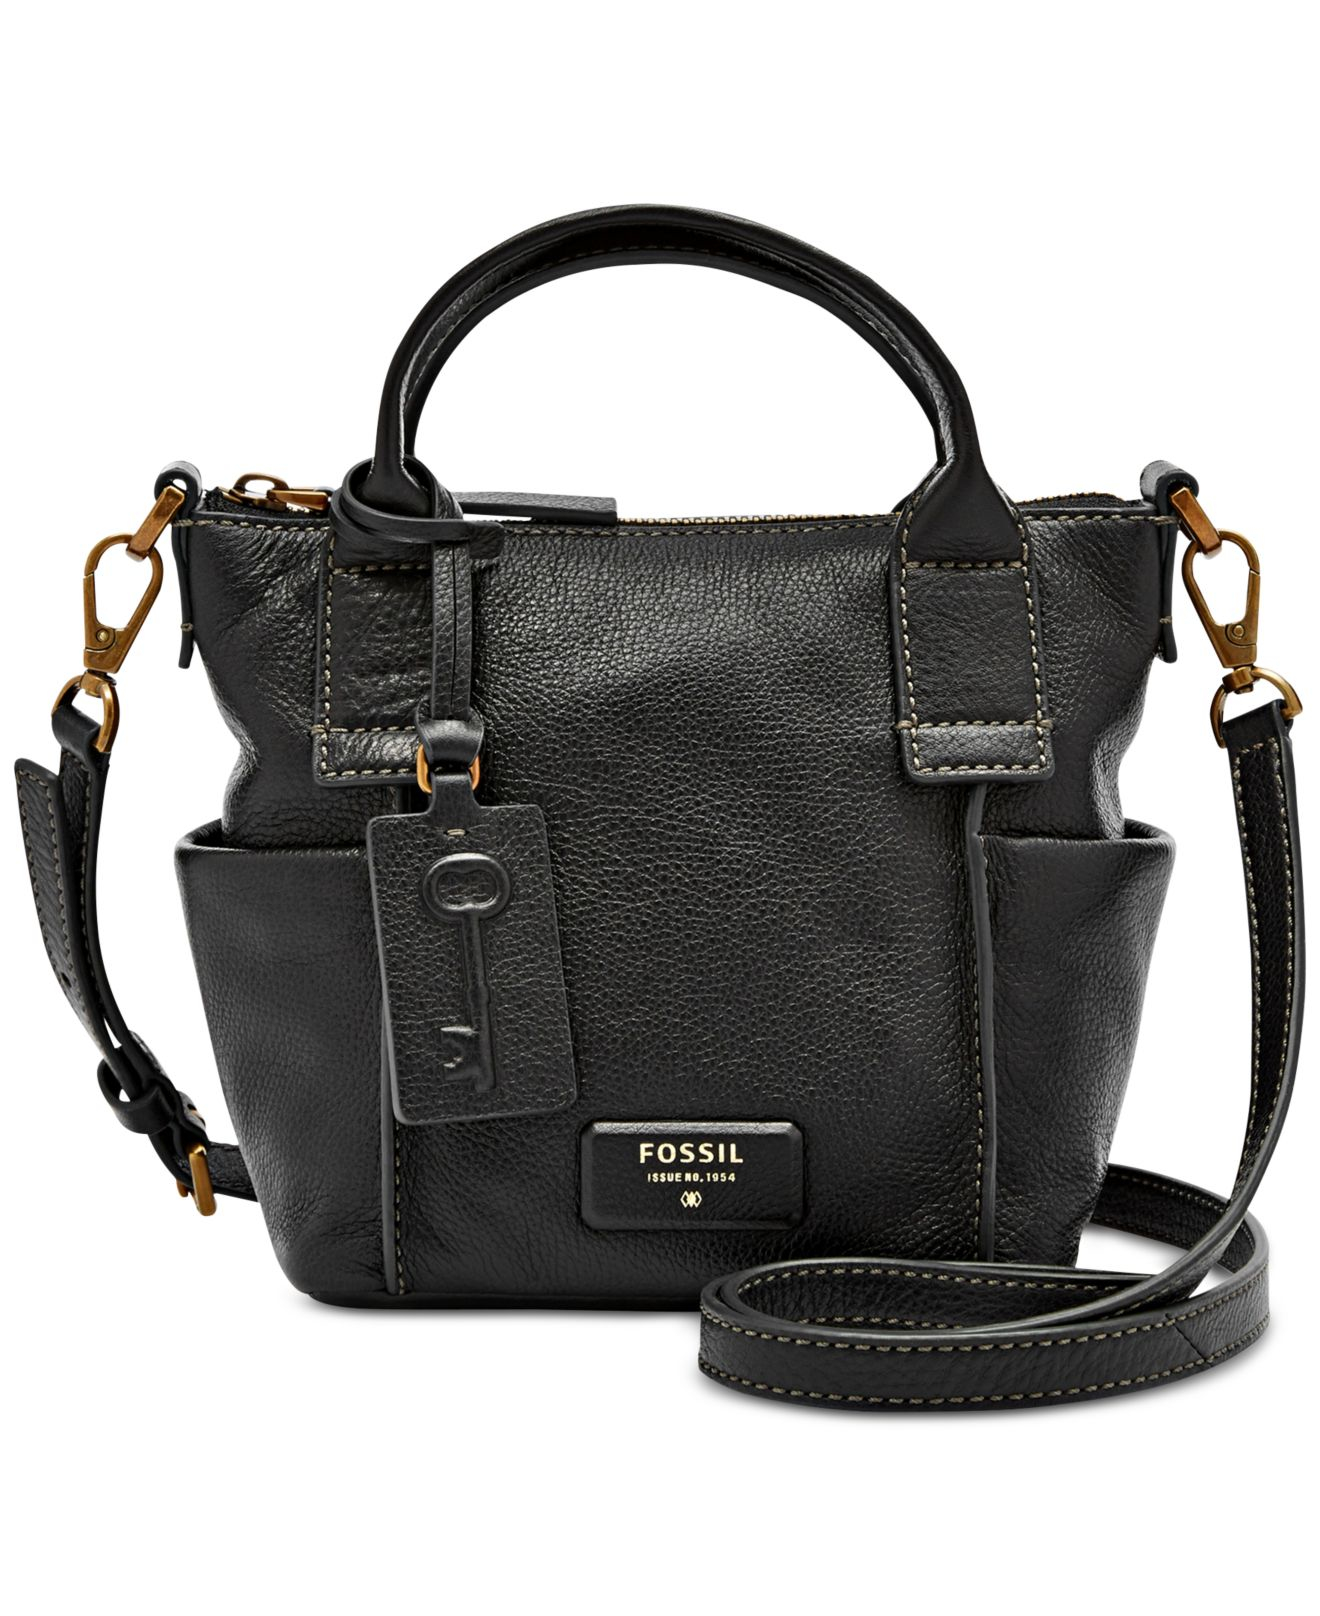 Fossil Emerson Mini Leather Satchel in Black | Lyst